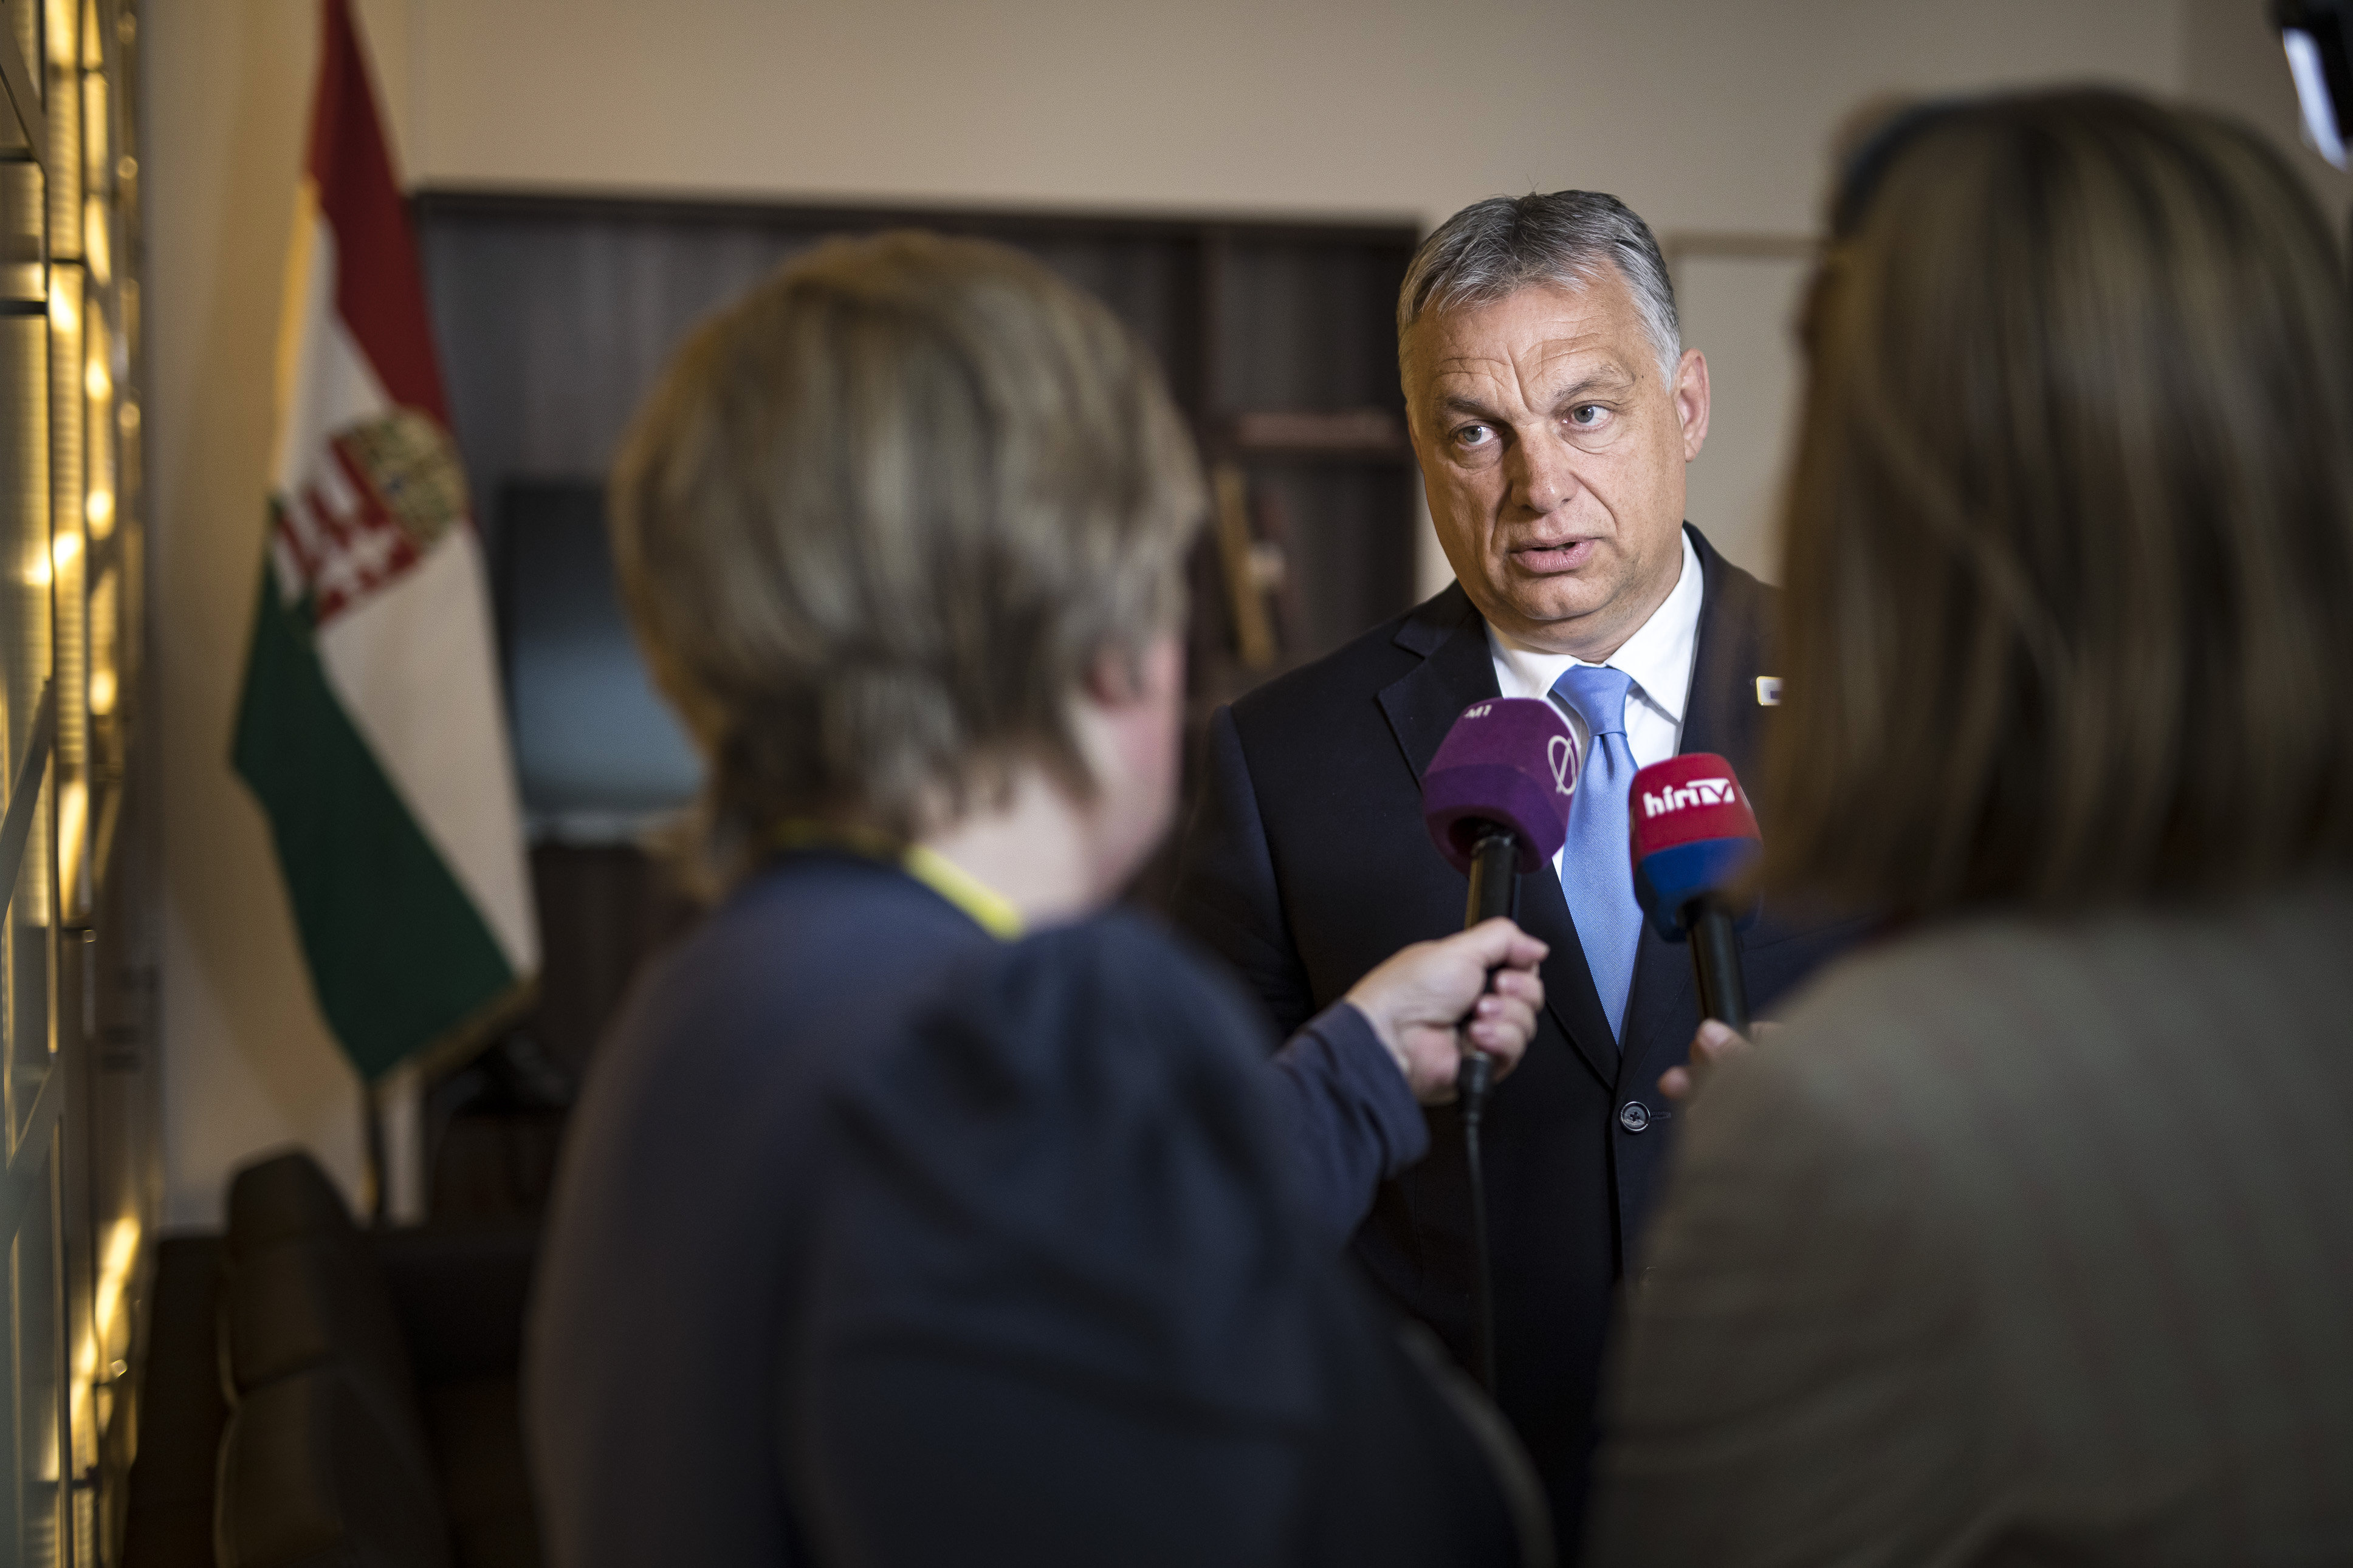 orbán brussels interview